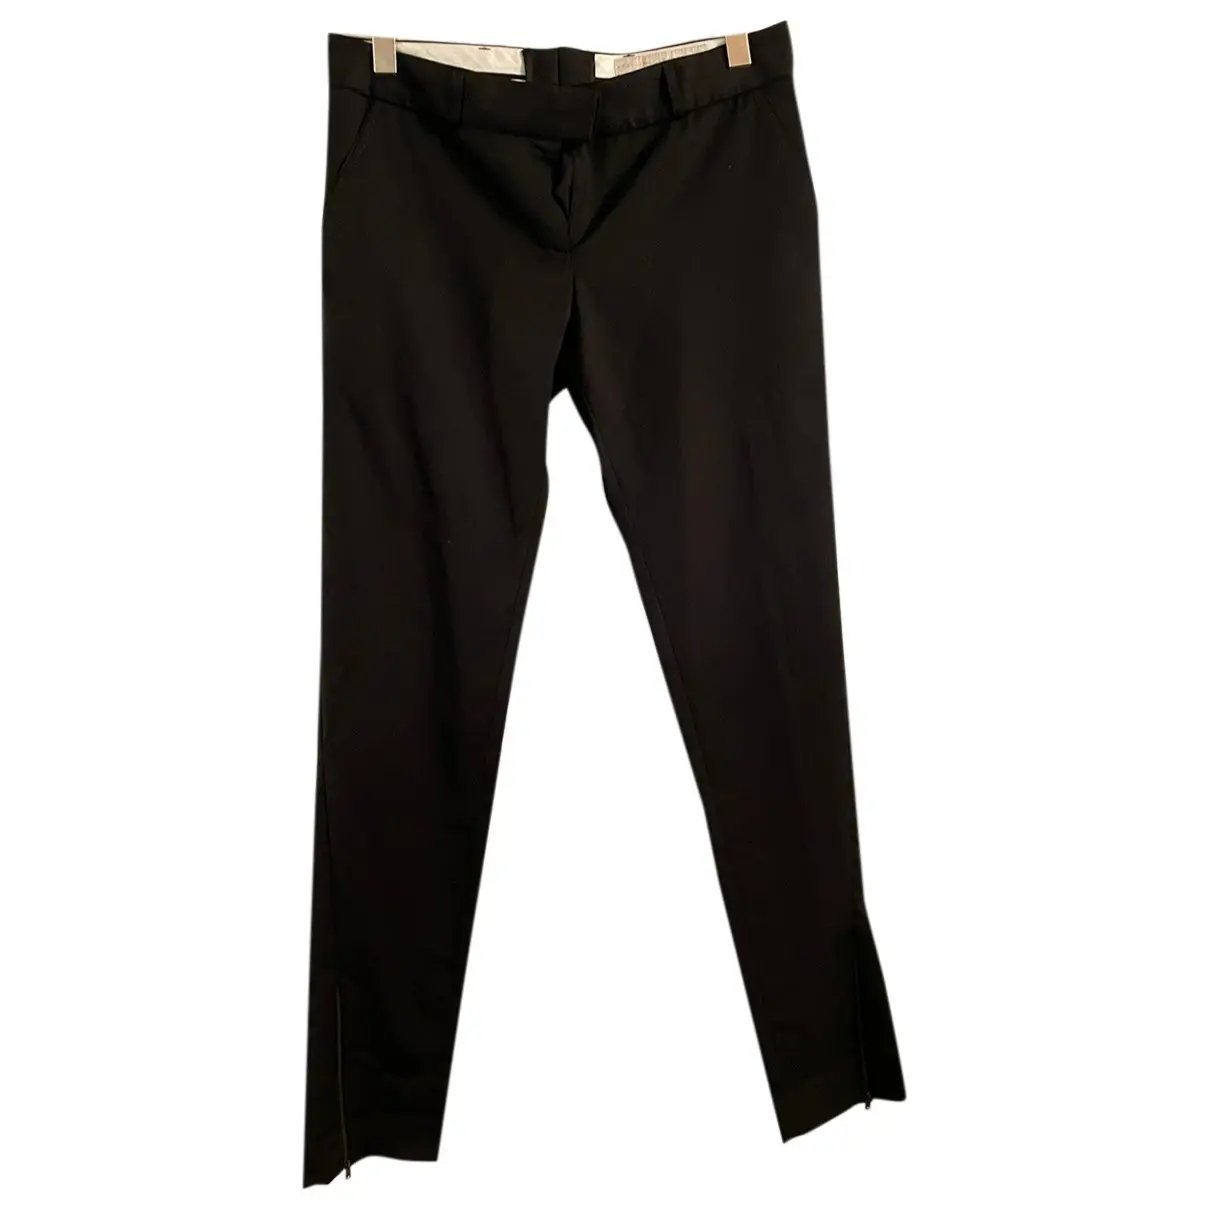 Wool trousers Stella McCartney For H&M